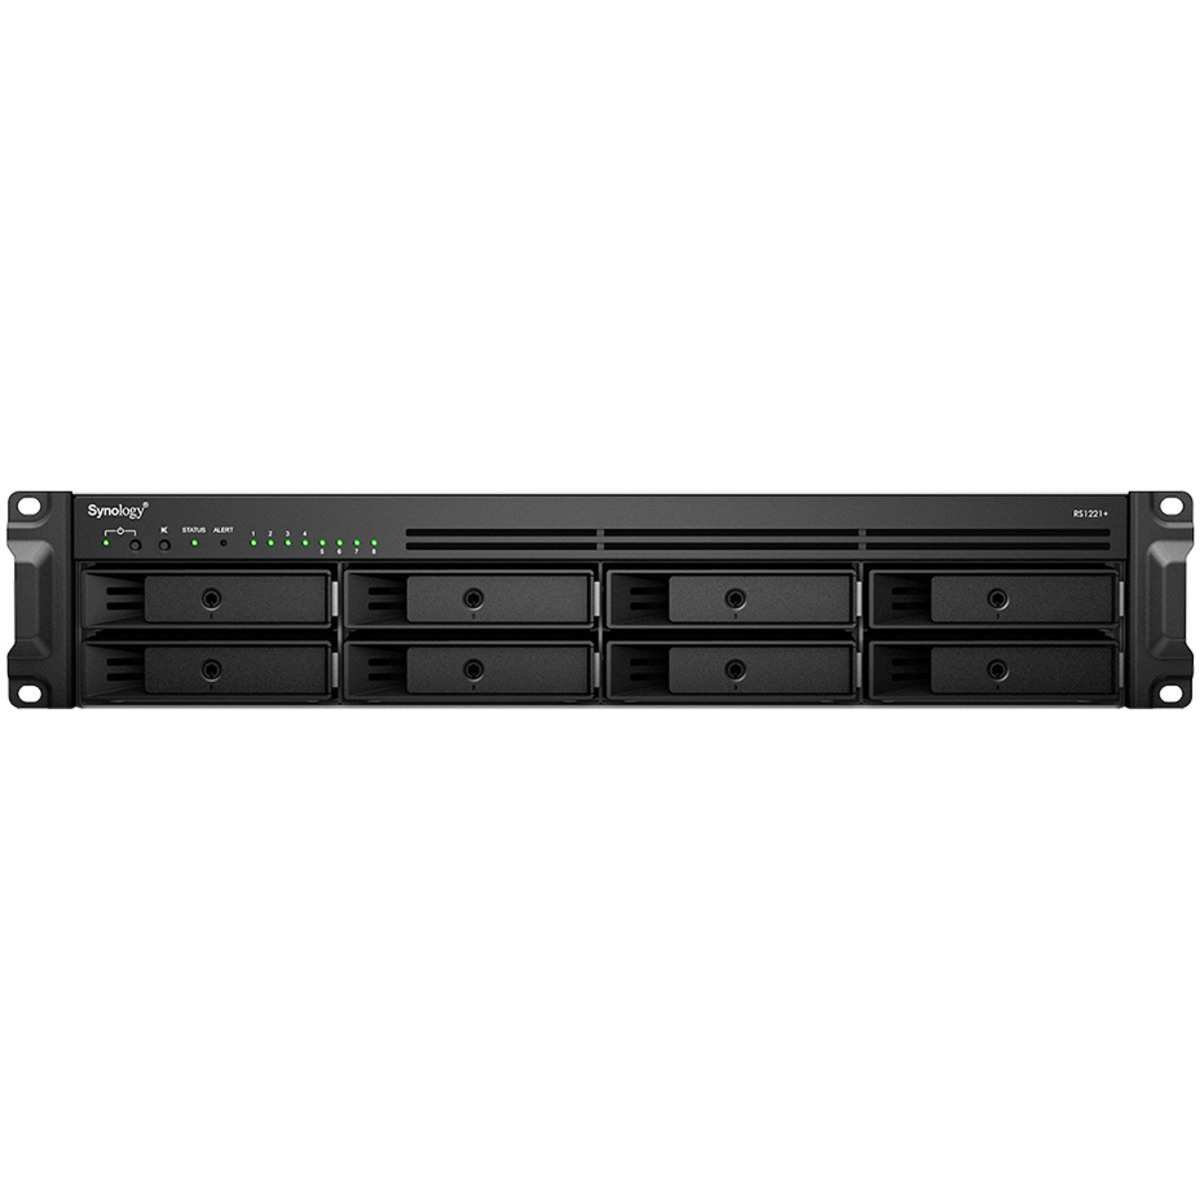 buy $4184 Synology RackStation RS1221RP+ 64tb RackMount NAS - Network Attached Storage Device 8x8000gb Seagate EXOS ST8000NM000A 3.5 7200rpm SATA 6Gb/s HDD ENTERPRISE Class Drives Installed - Burn-In Tested - nas headquarters buy network attached storage server device das new raid-5 free shipping usa christmas new year holiday sale RackStation RS1221RP+